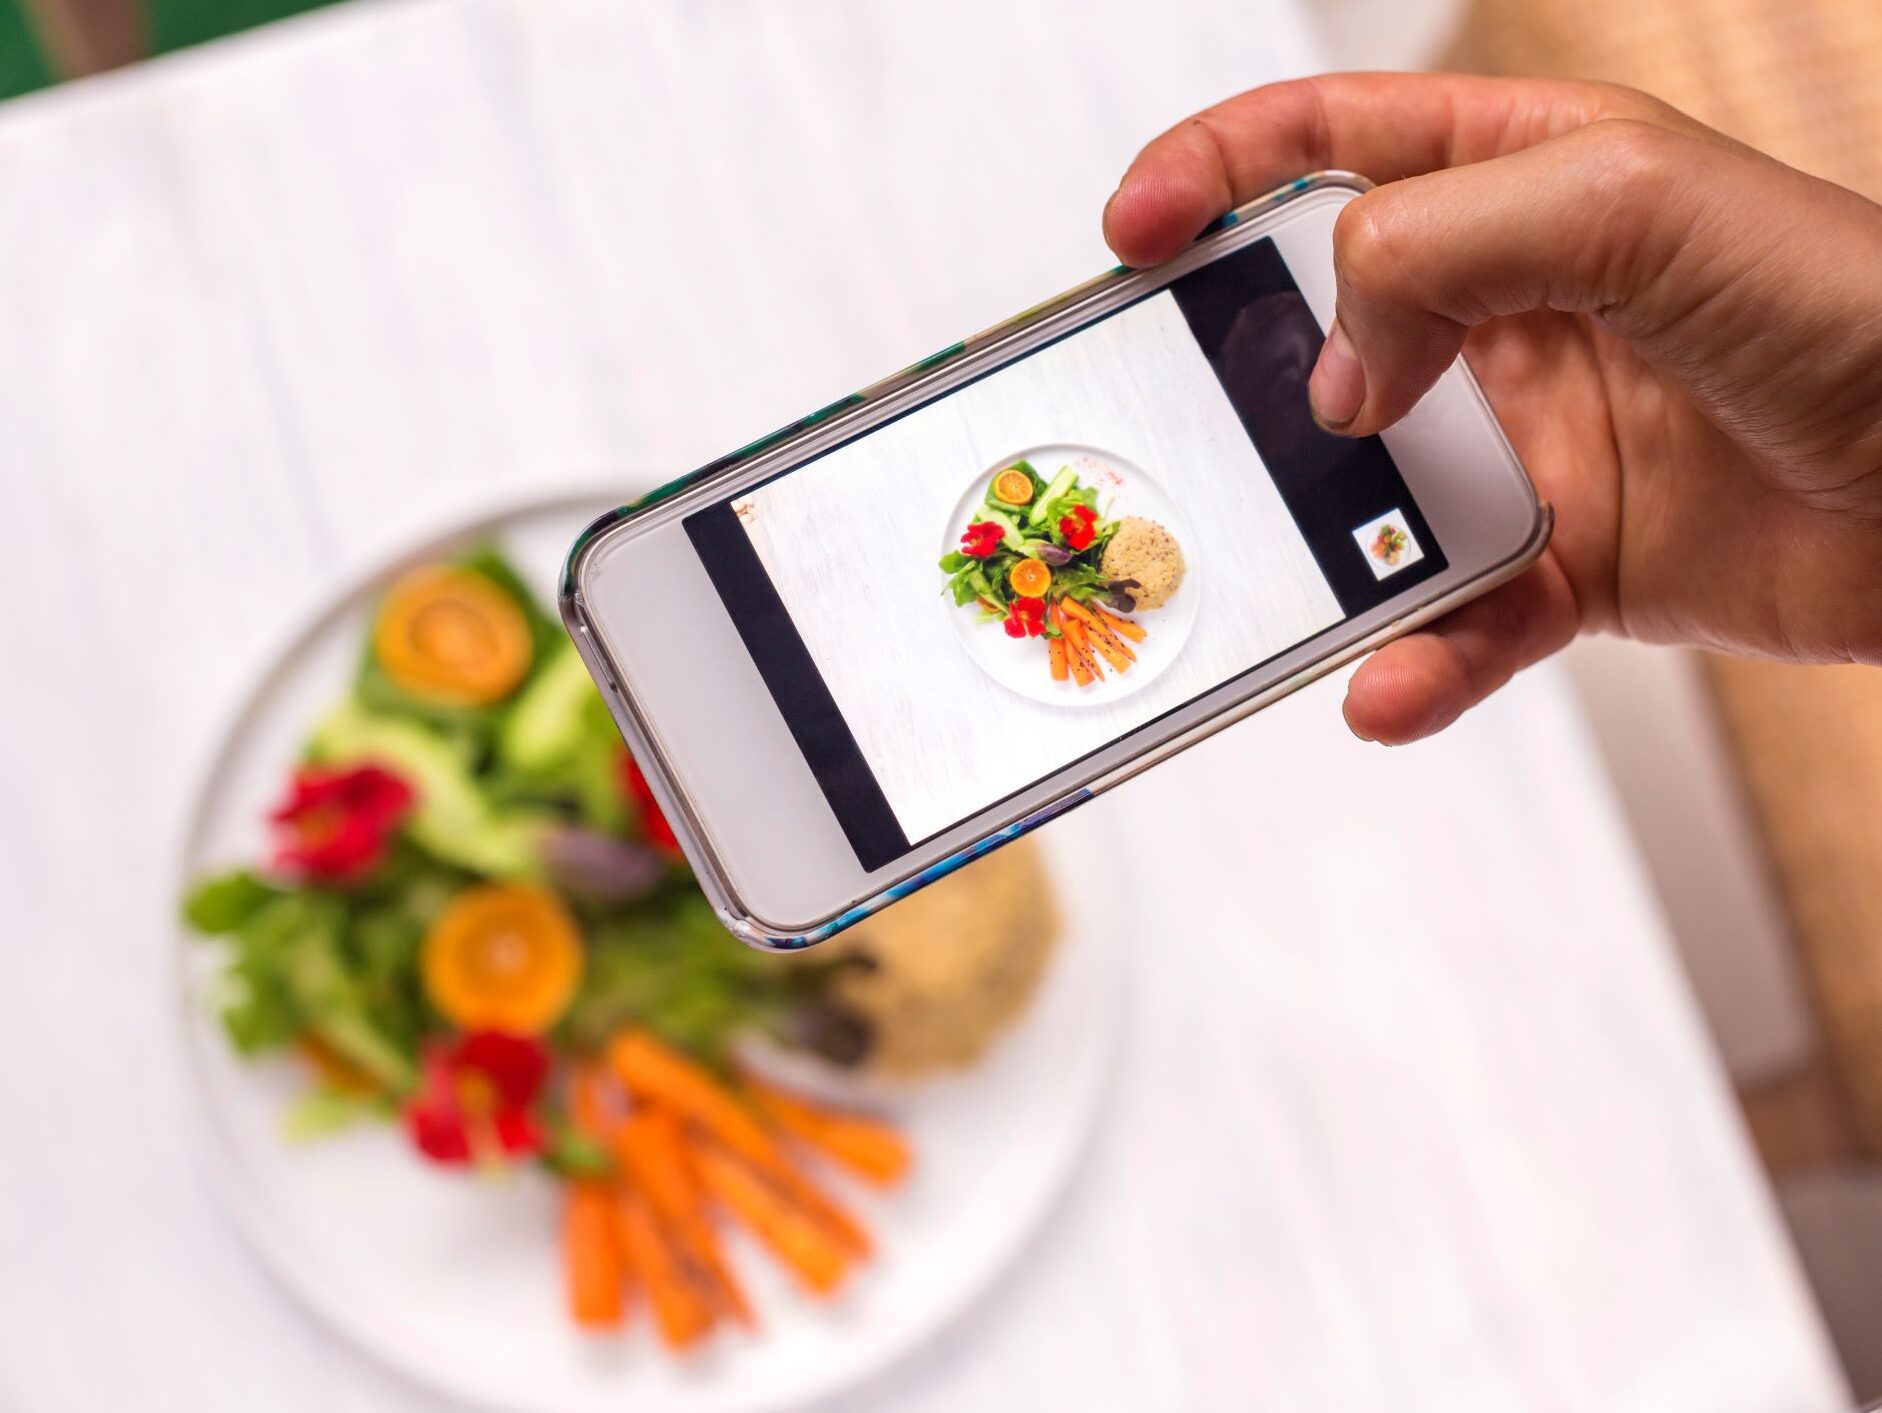 Chef taking a photo of a meal